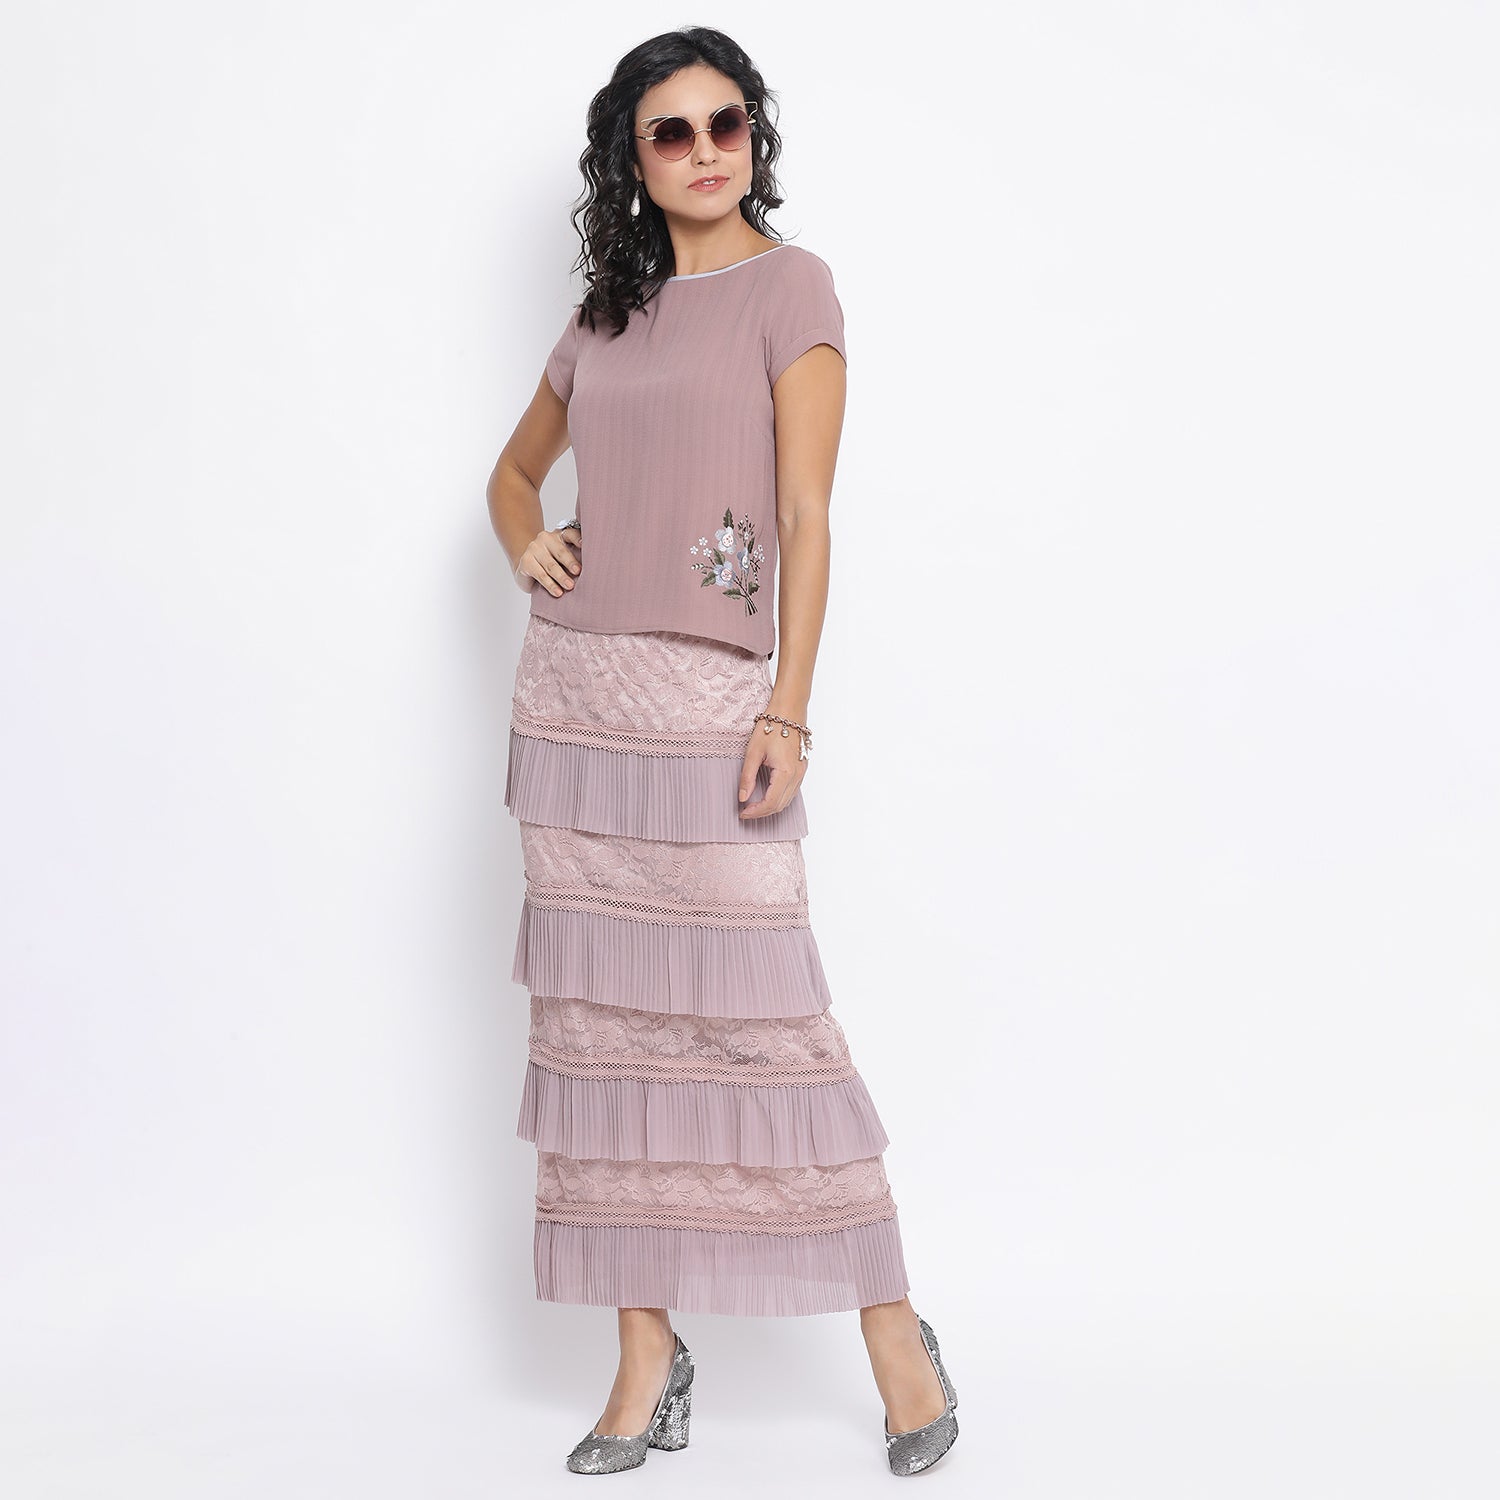 Rose Pink Net Frill Skirt With Lace